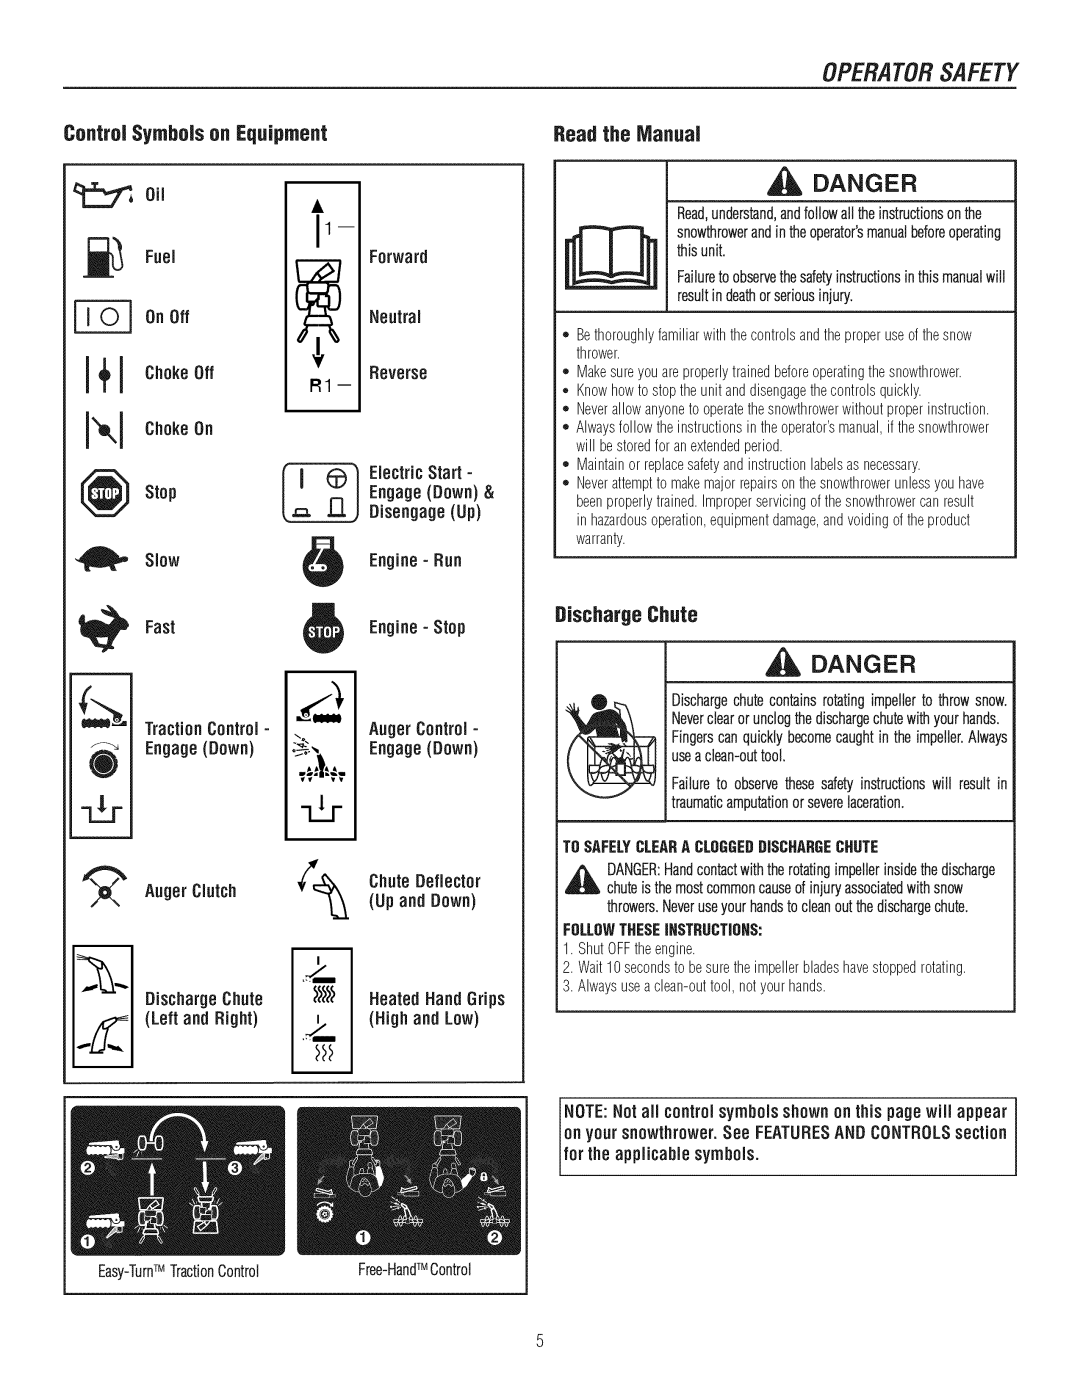 Craftsman C950-52943-0 owner manual Operatorsafety, Control Symbols on Equipment, Discharge Chute 